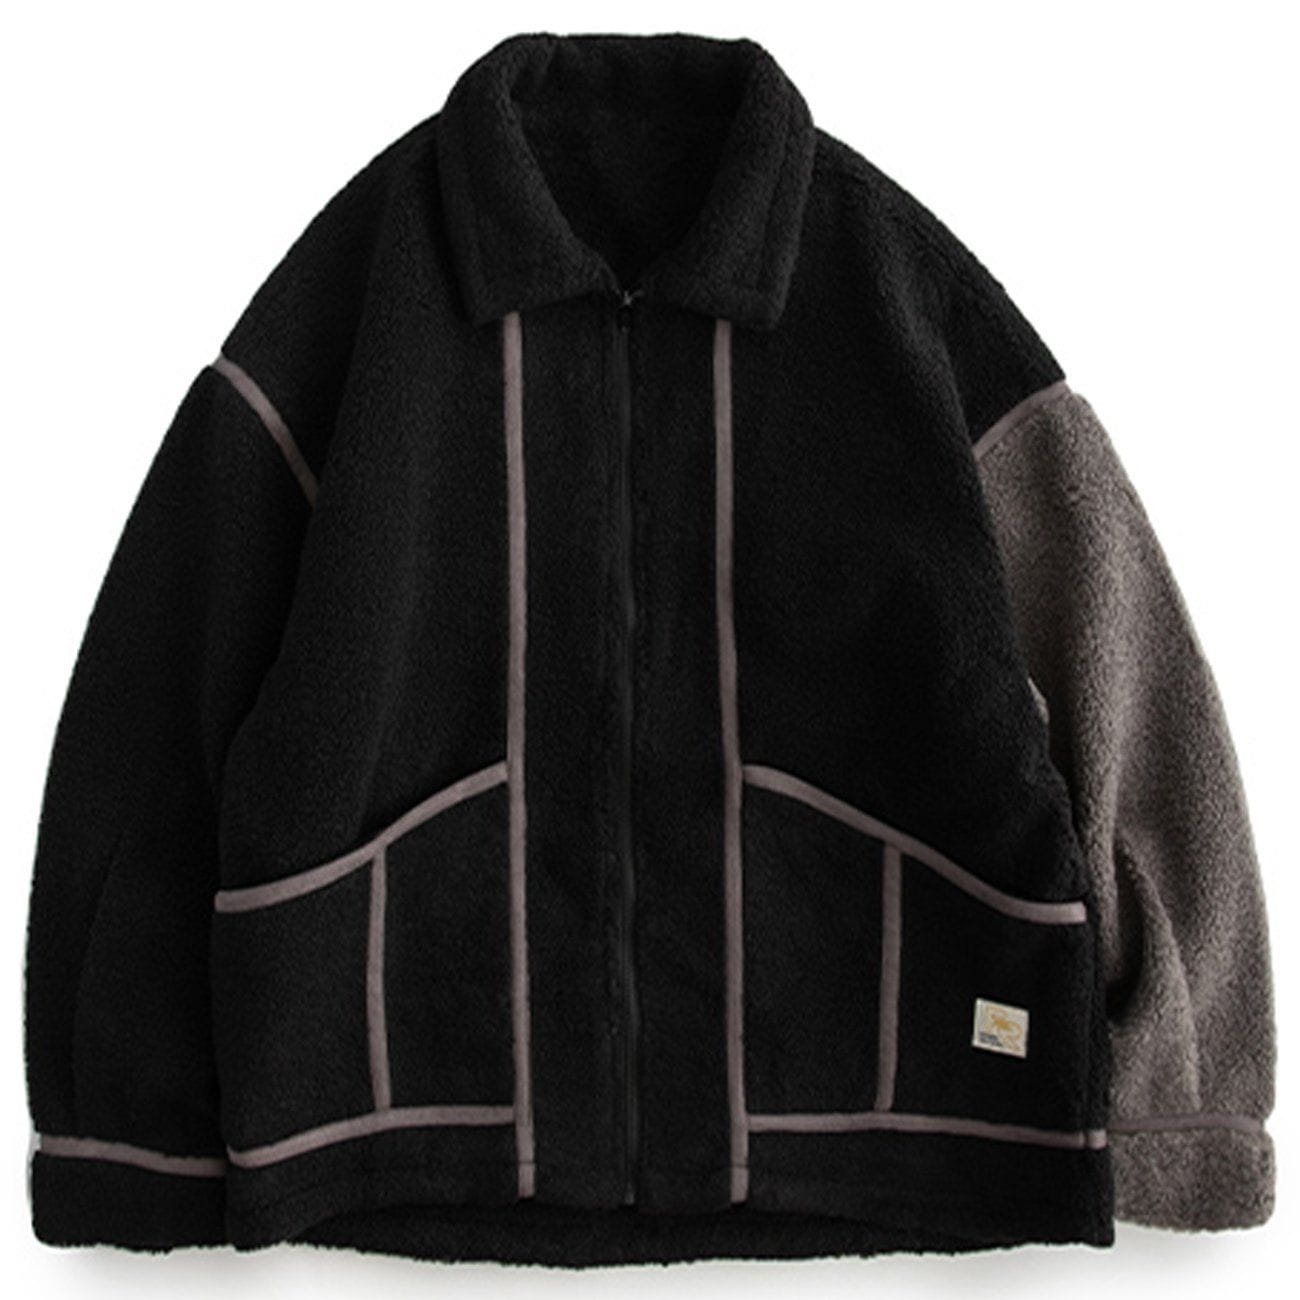 LUXENFY™ - Stitching Stripes Sherpa Winter Coat luxenfy.com